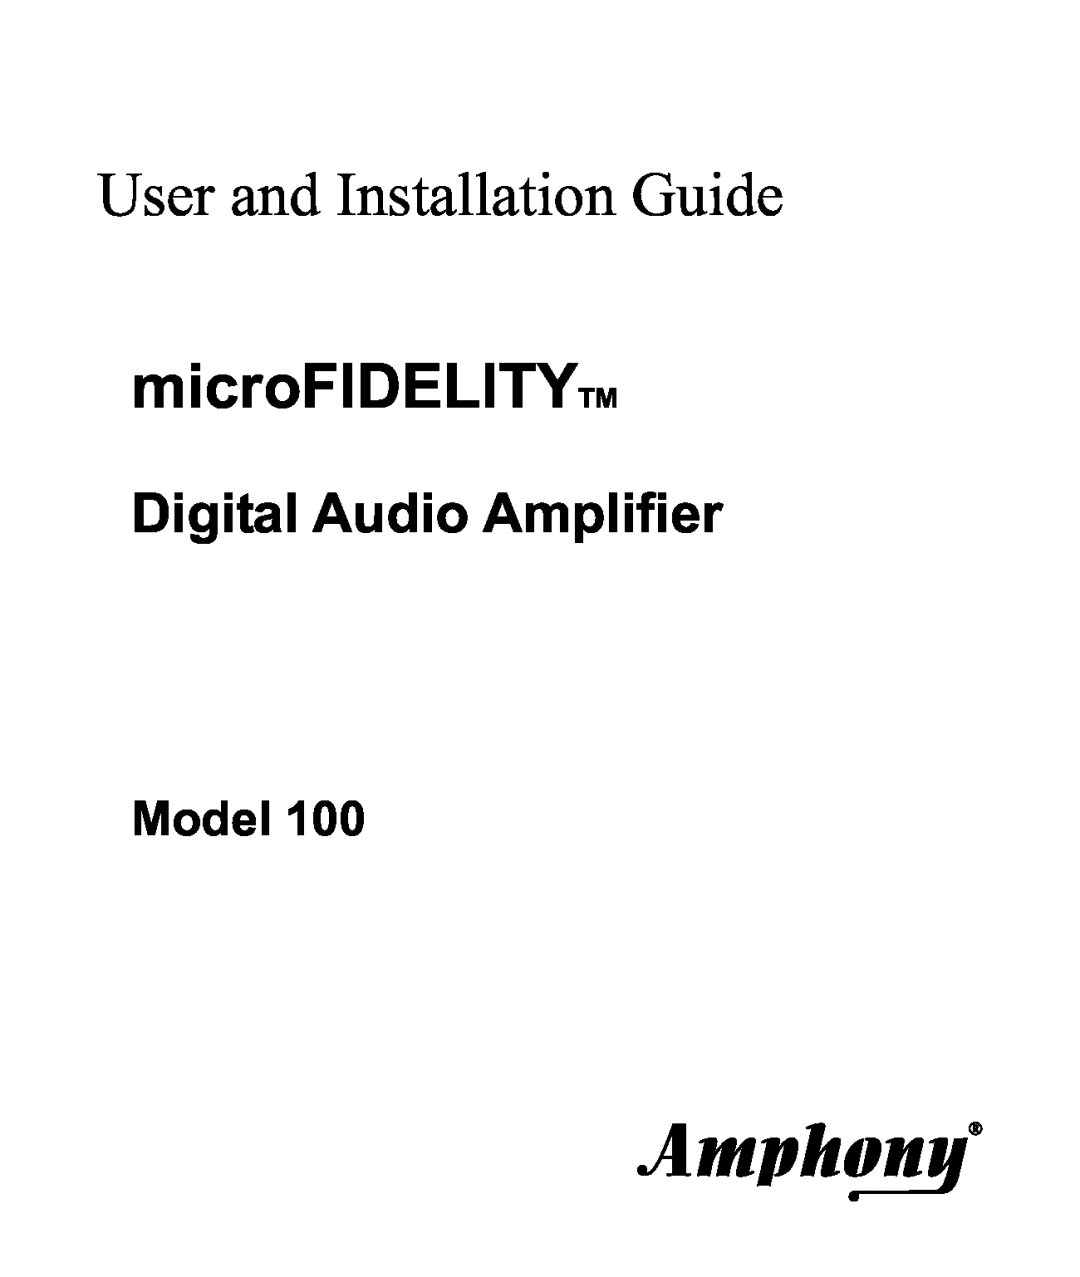 Amphony 100 manual Digital Audio Amplifier, Model, User and Installation Guide, microFIDELITYTM 